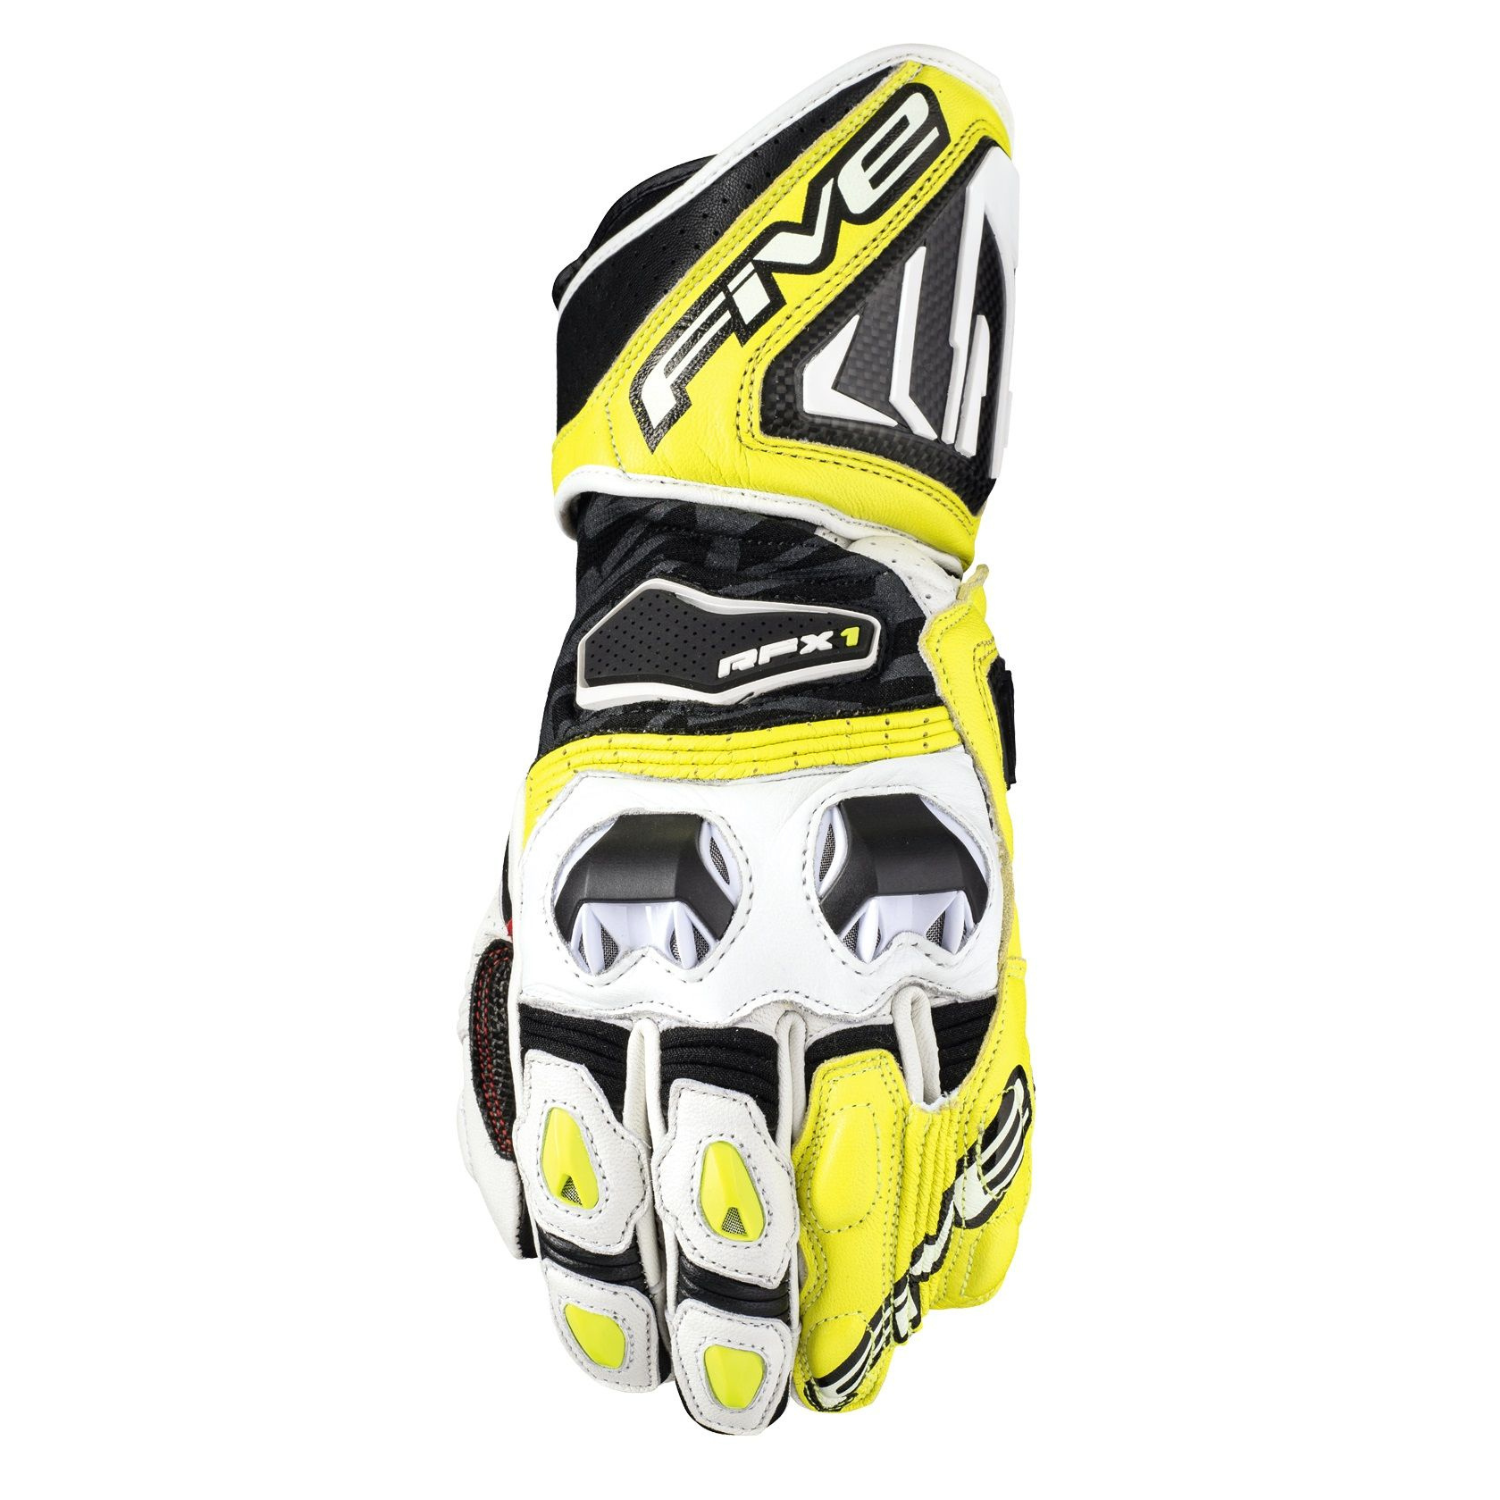 Image of Five RFX1 Gloves White Yellow Talla L